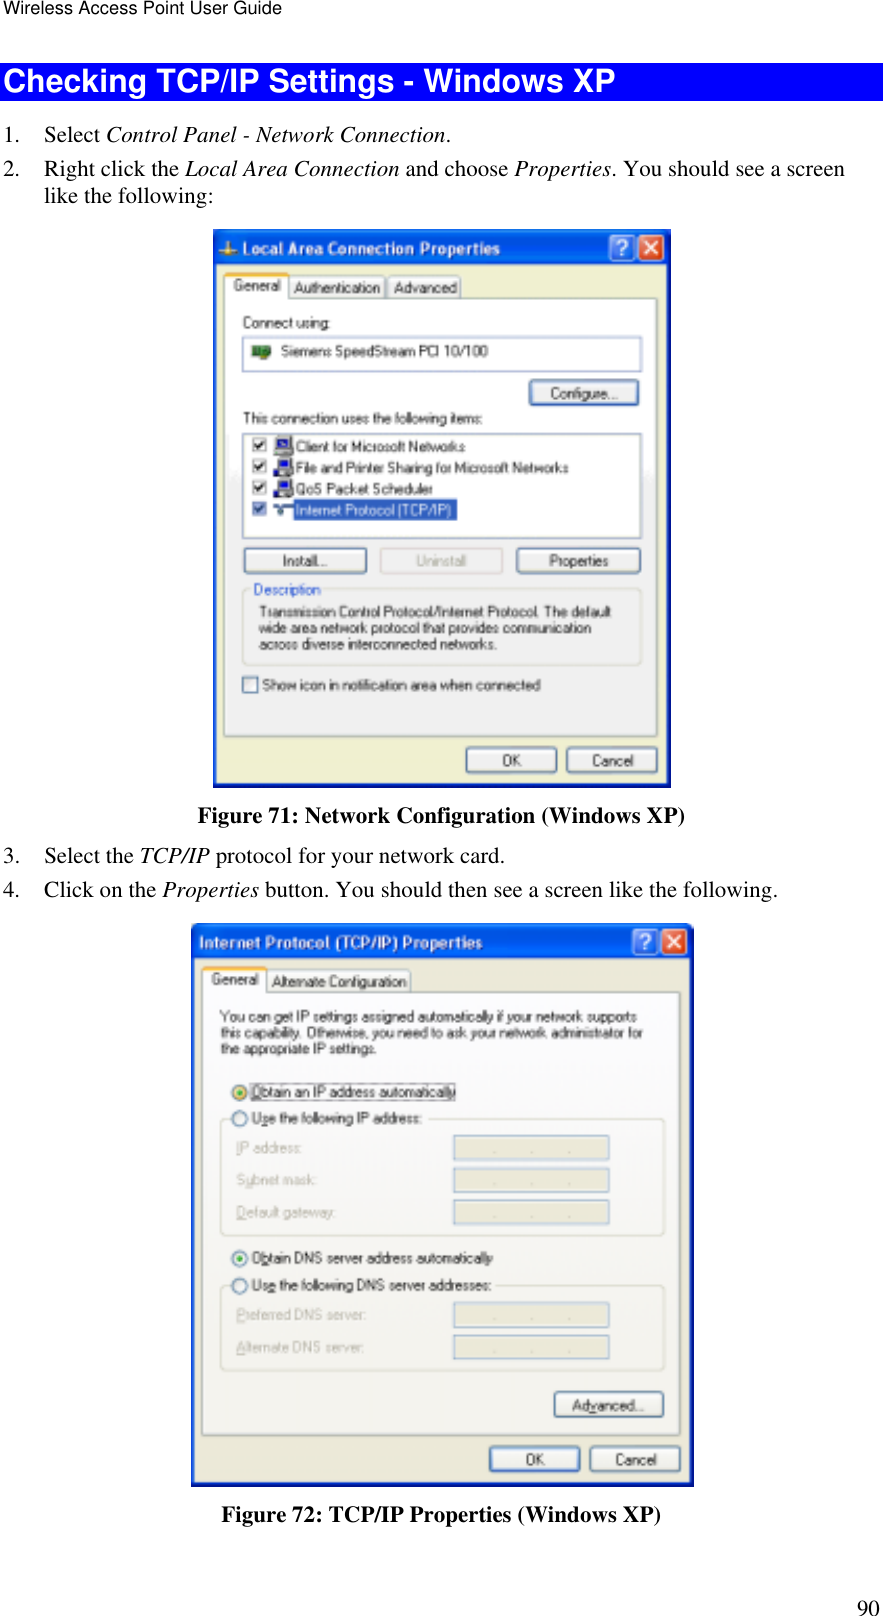 Wireless Access Point User Guide 90 Checking TCP/IP Settings - Windows XP 1. Select Control Panel - Network Connection. 2.  Right click the Local Area Connection and choose Properties. You should see a screen like the following:  Figure 71: Network Configuration (Windows XP) 3. Select the TCP/IP protocol for your network card. 4.  Click on the Properties button. You should then see a screen like the following.  Figure 72: TCP/IP Properties (Windows XP) 